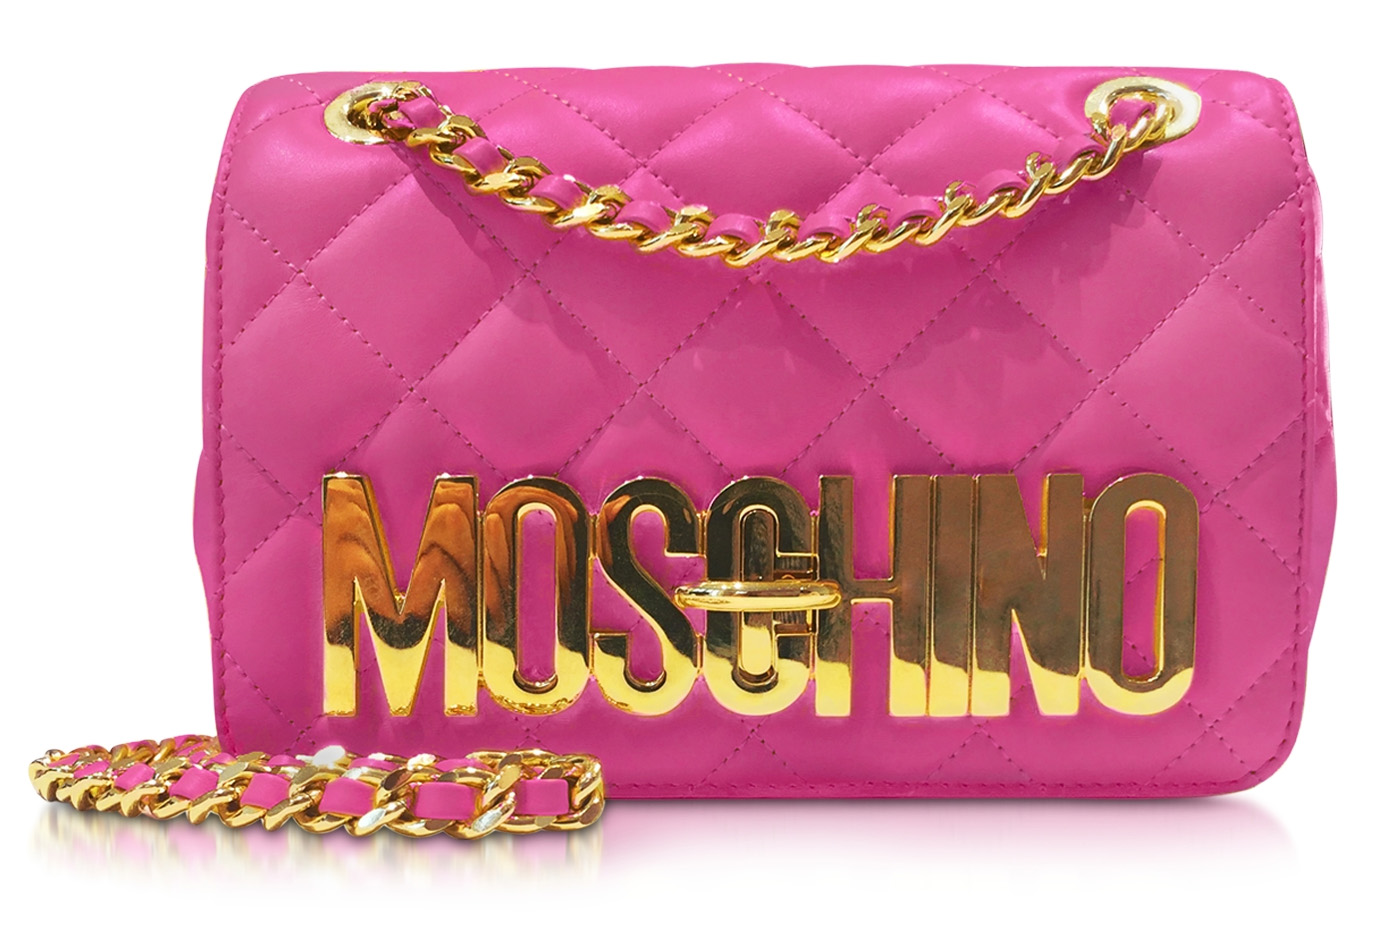 Designer handbags - Moschino Quilted Nappa Leather Golden Logo Shoulder Bag with Chain